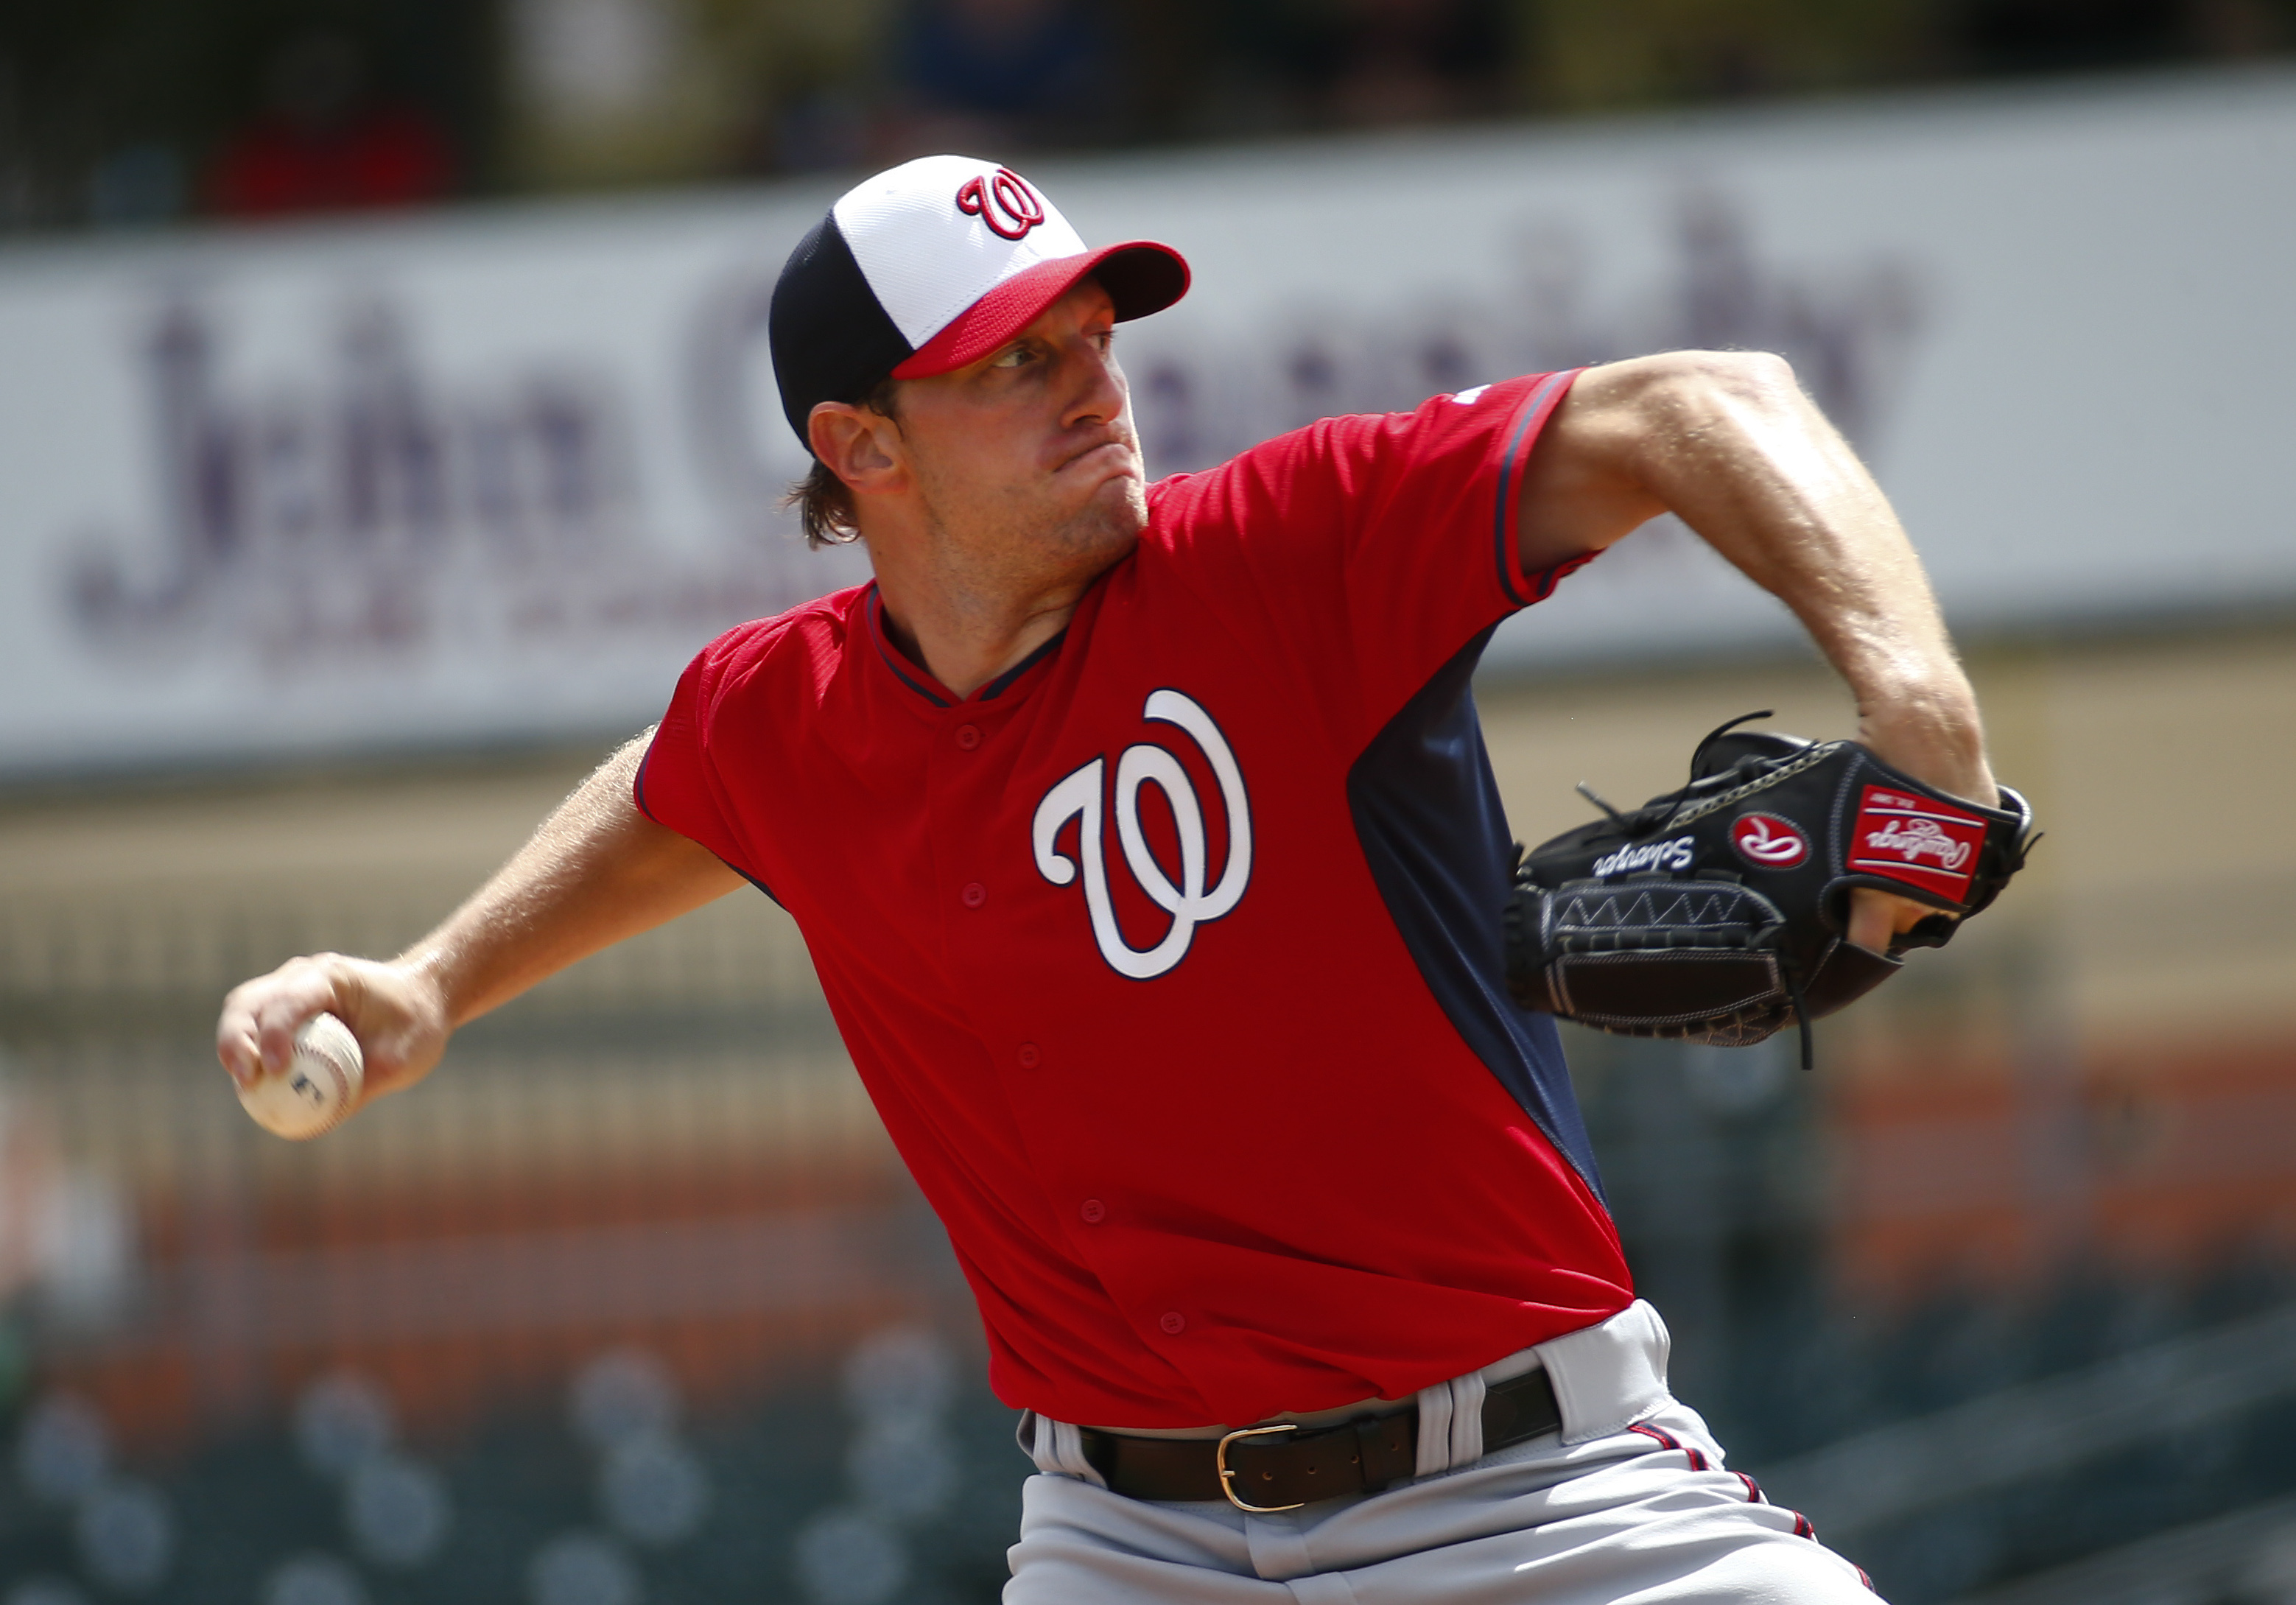 Two tone: Max Scherzer's playfulness, intensity may be final piece for  Nationals - Washington Times